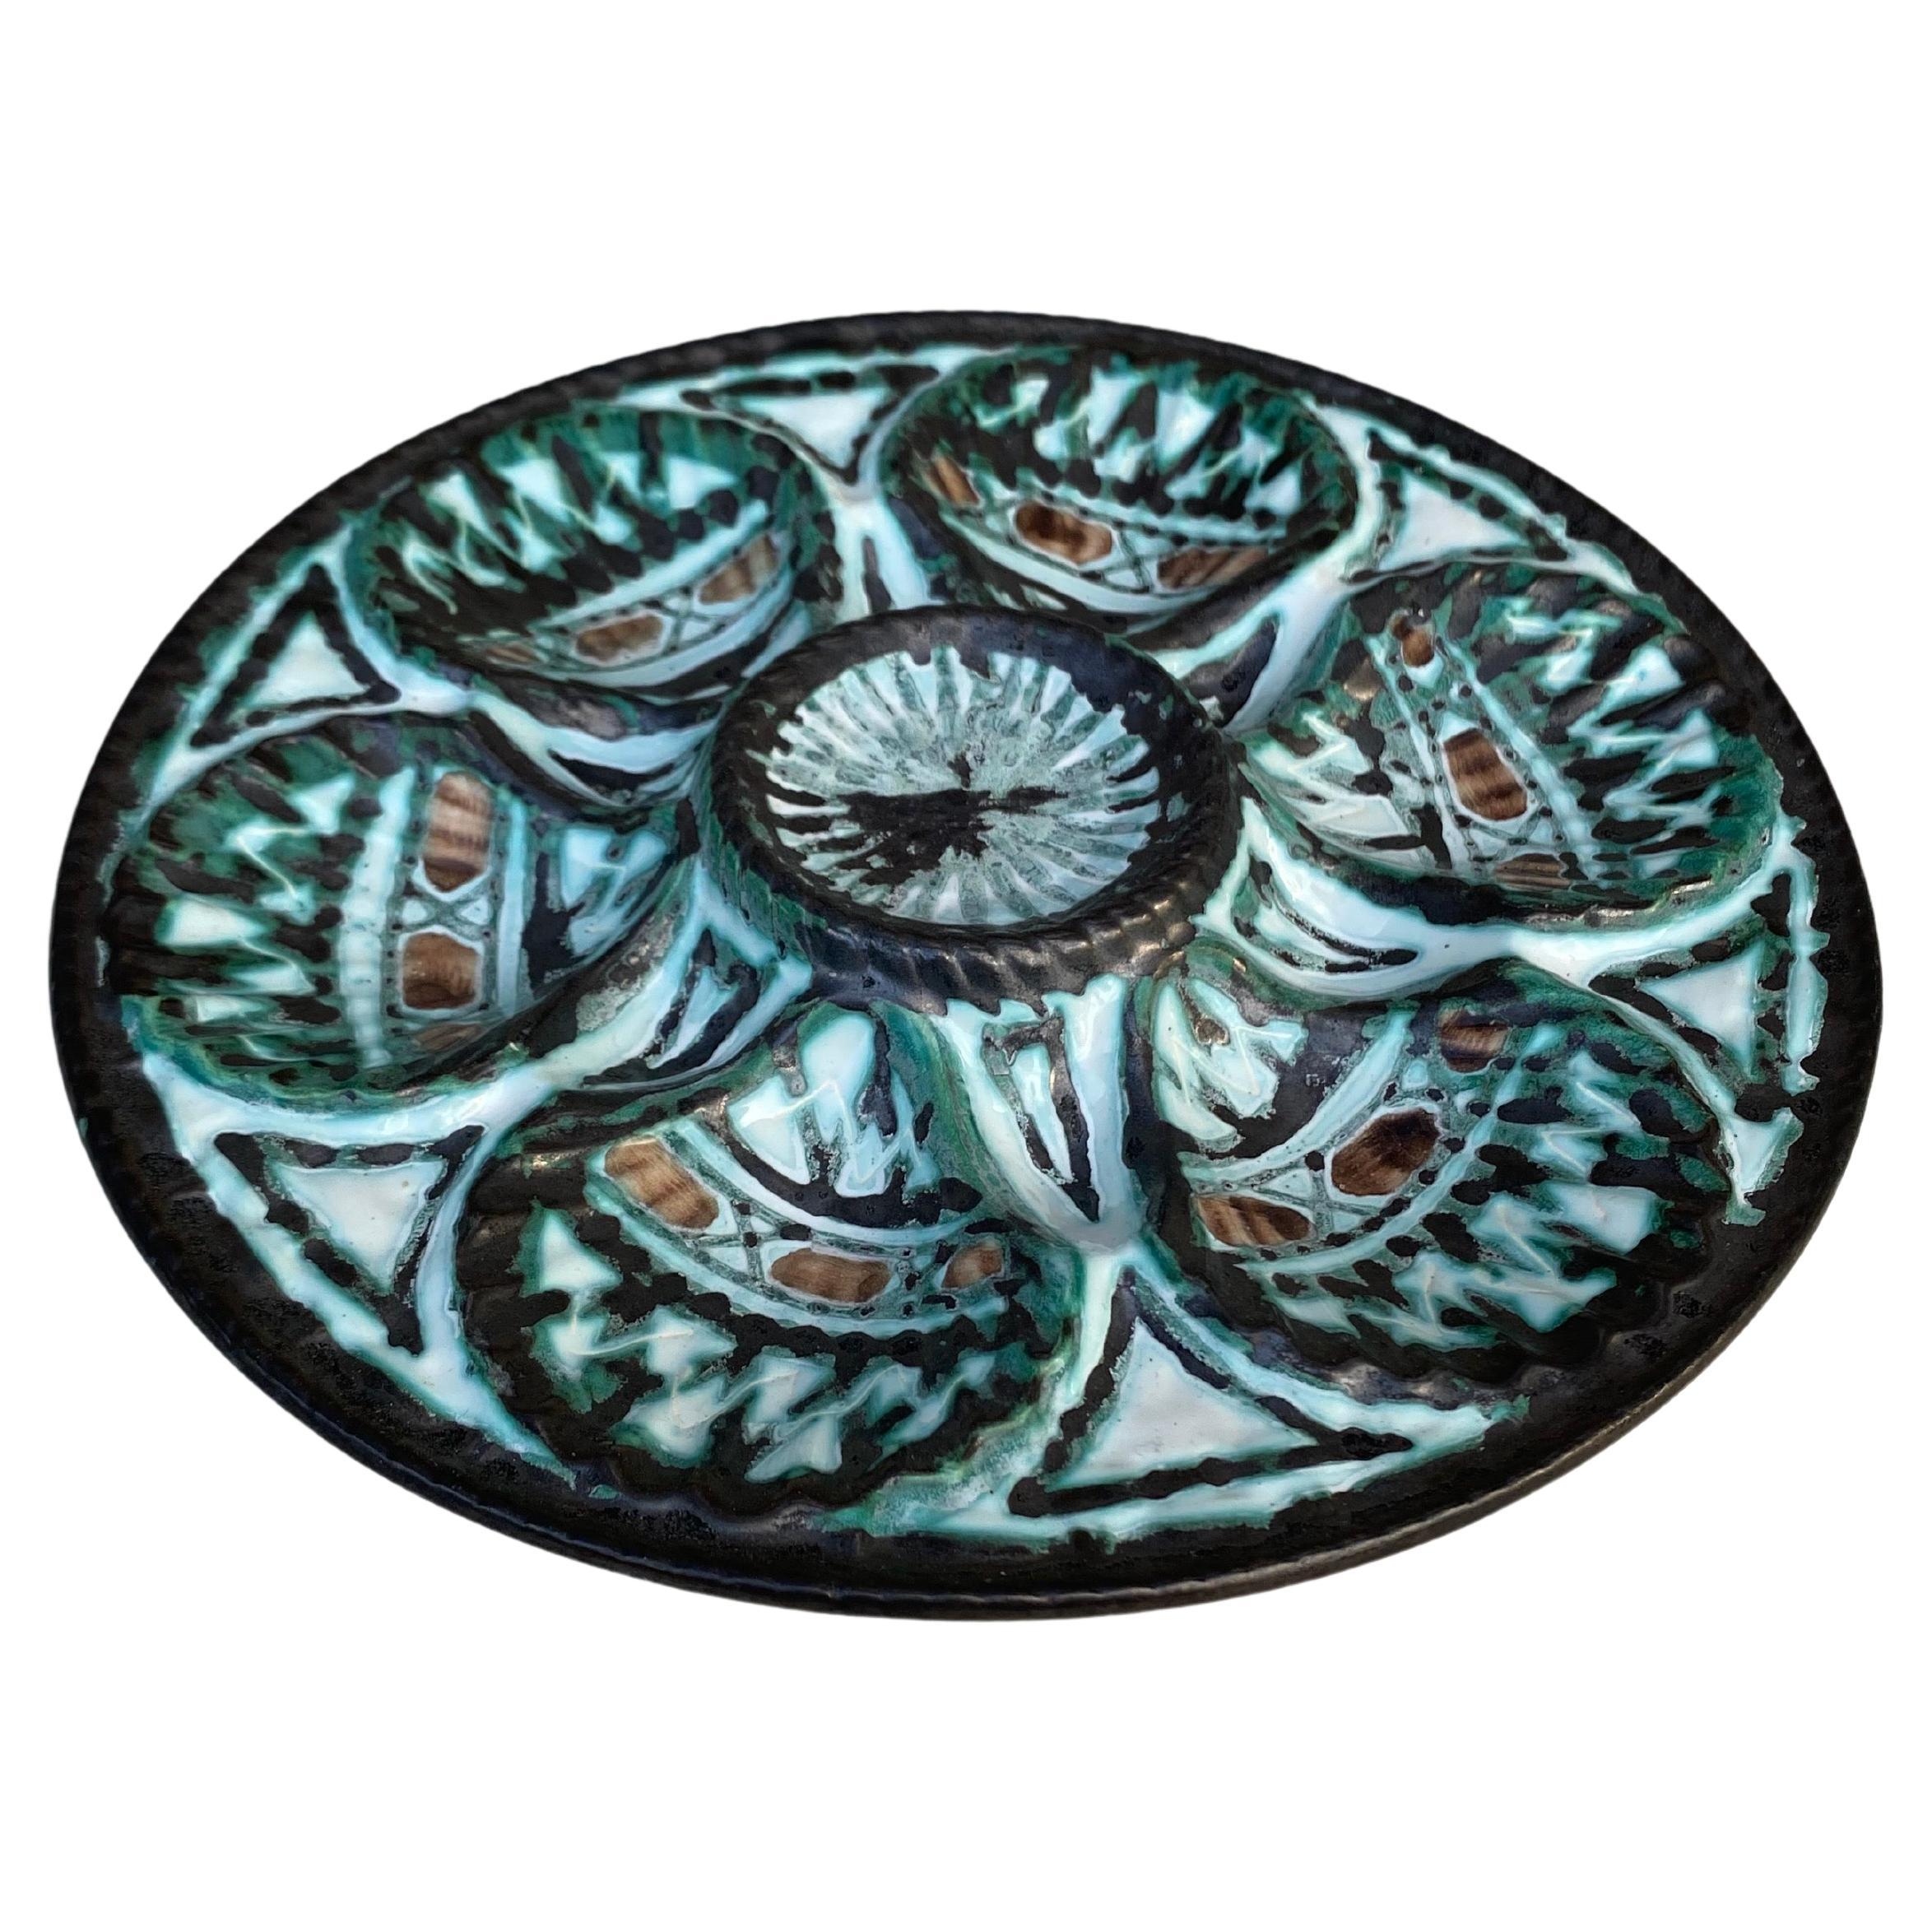 Rare Oyster Plate signed Robert Picault.
Robert Picault (1919 - 2000) was born in Vincennes, Paris and studied at the School of Applied Arts in Paris. After the war he spent a short time teaching drawing and in 1945 he and his schoolfriends Roger